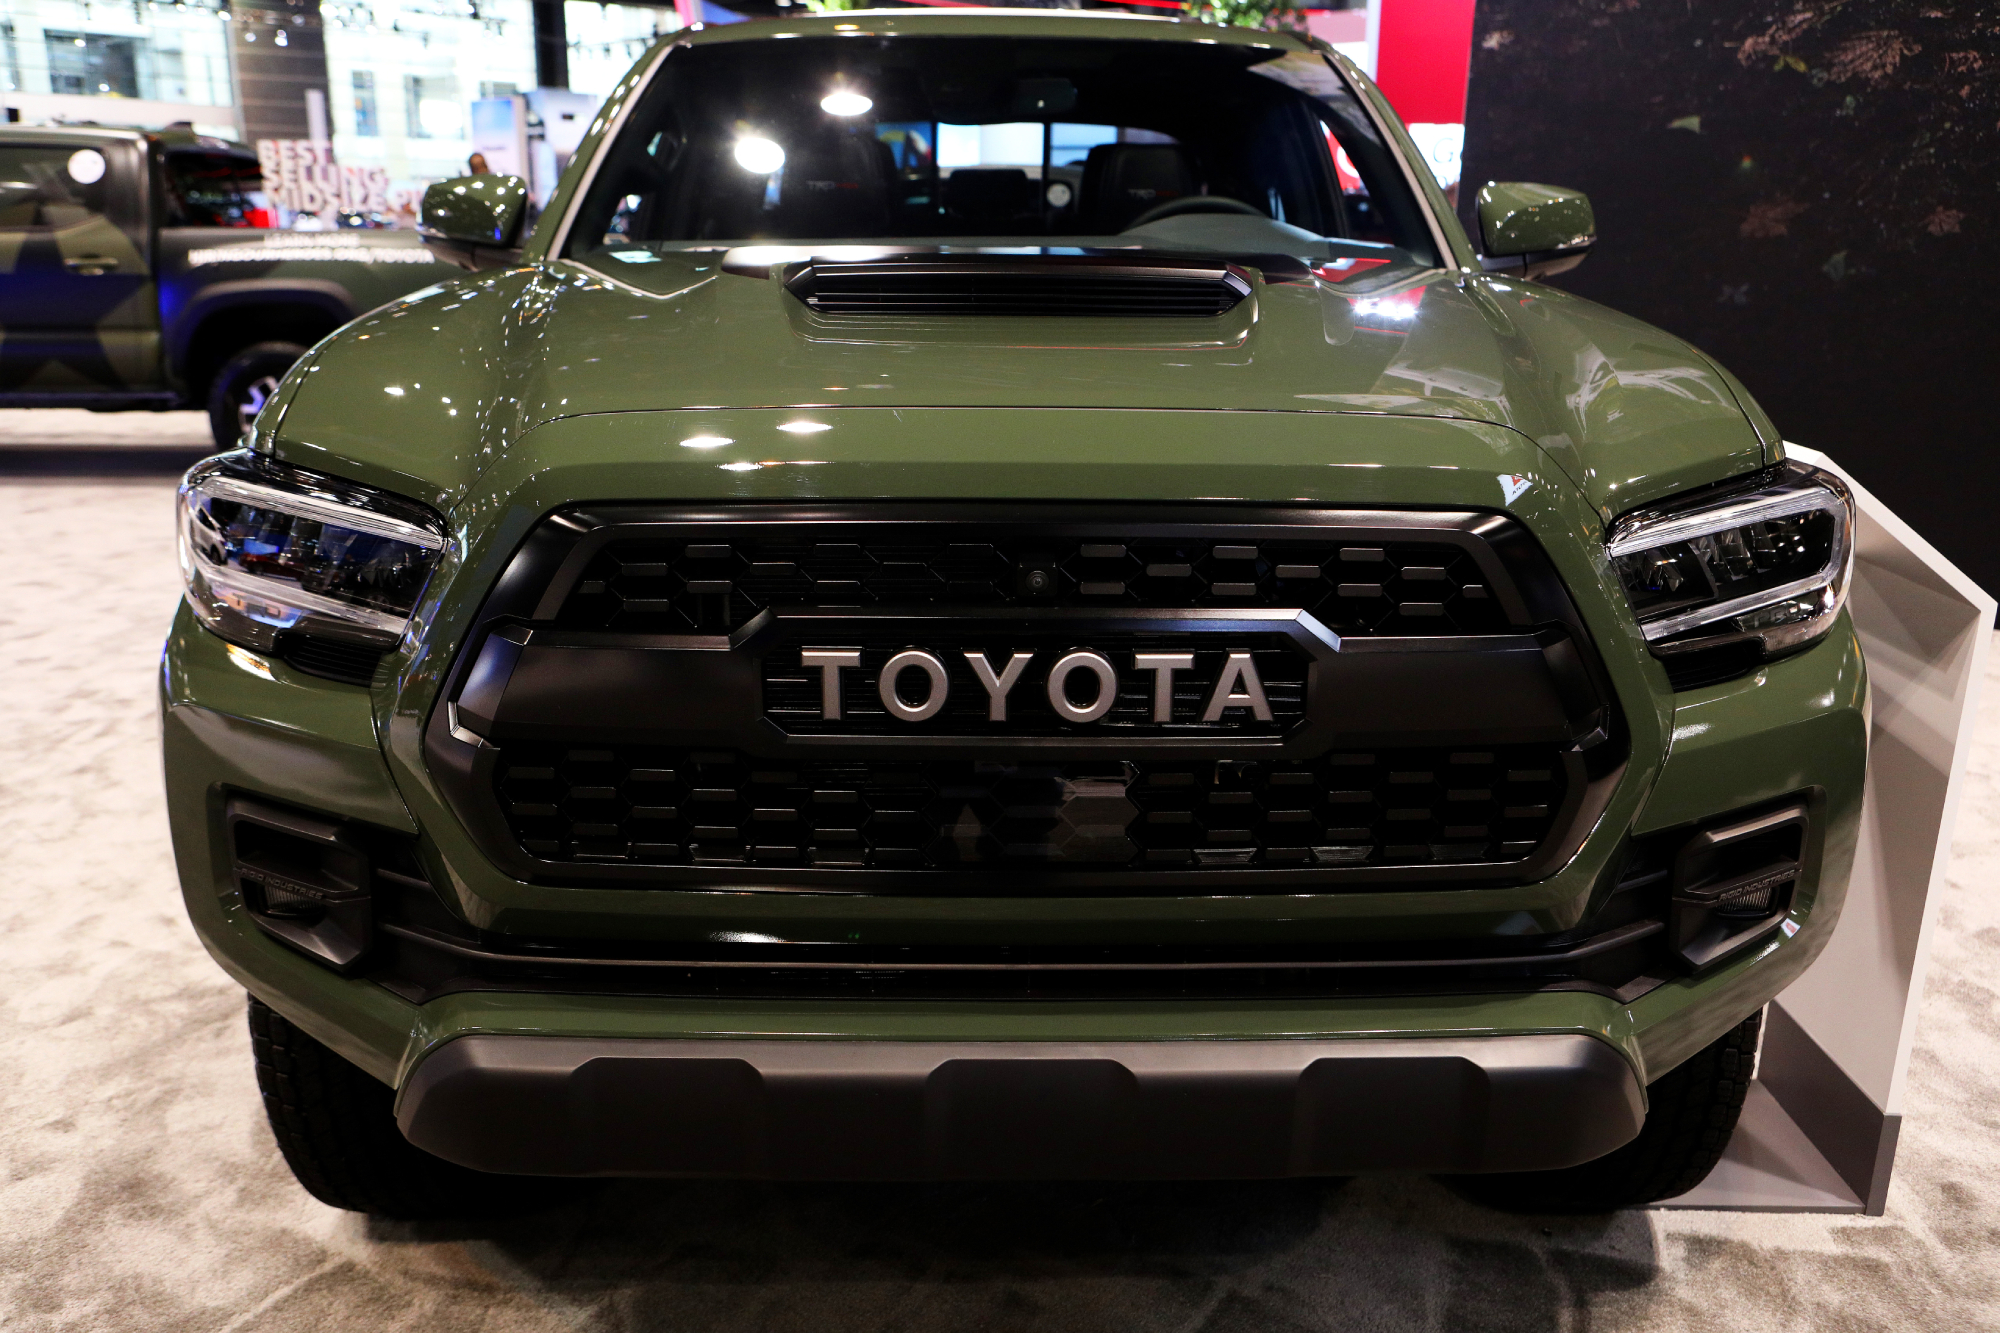 An army green 2021 toyota tacoma TRD Pro grille on display at an auto show